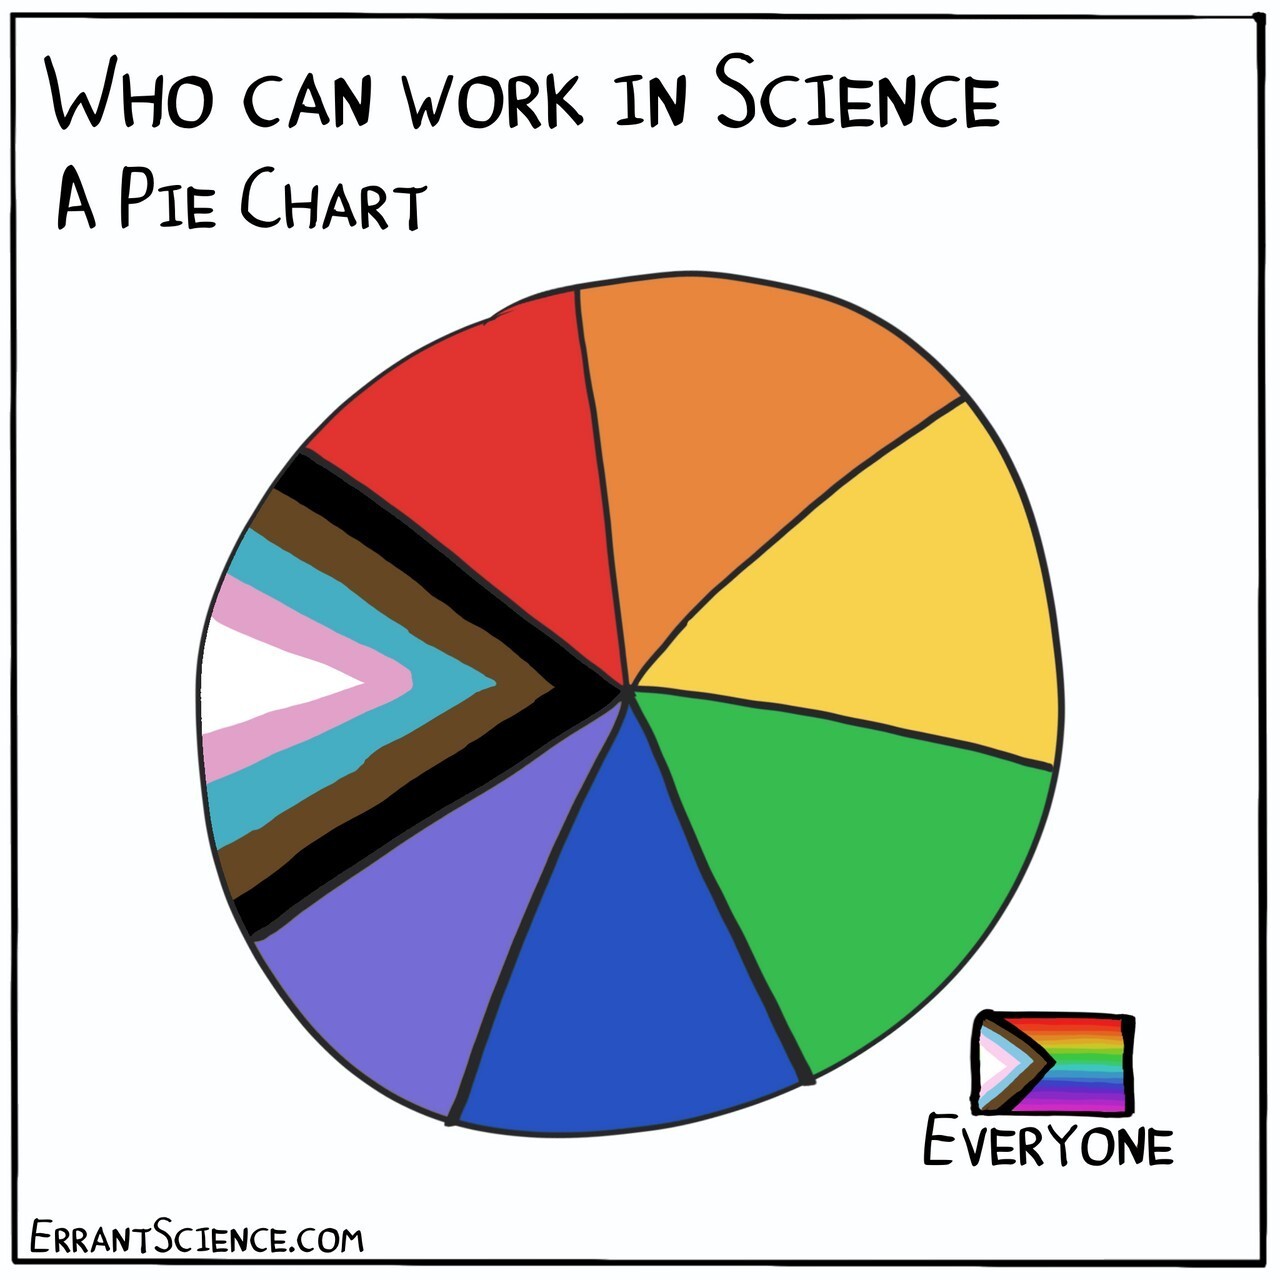 Rainbow pie chard with the title: Who can working in scienceA Pie Chart. The rainbow legend says: Everyone